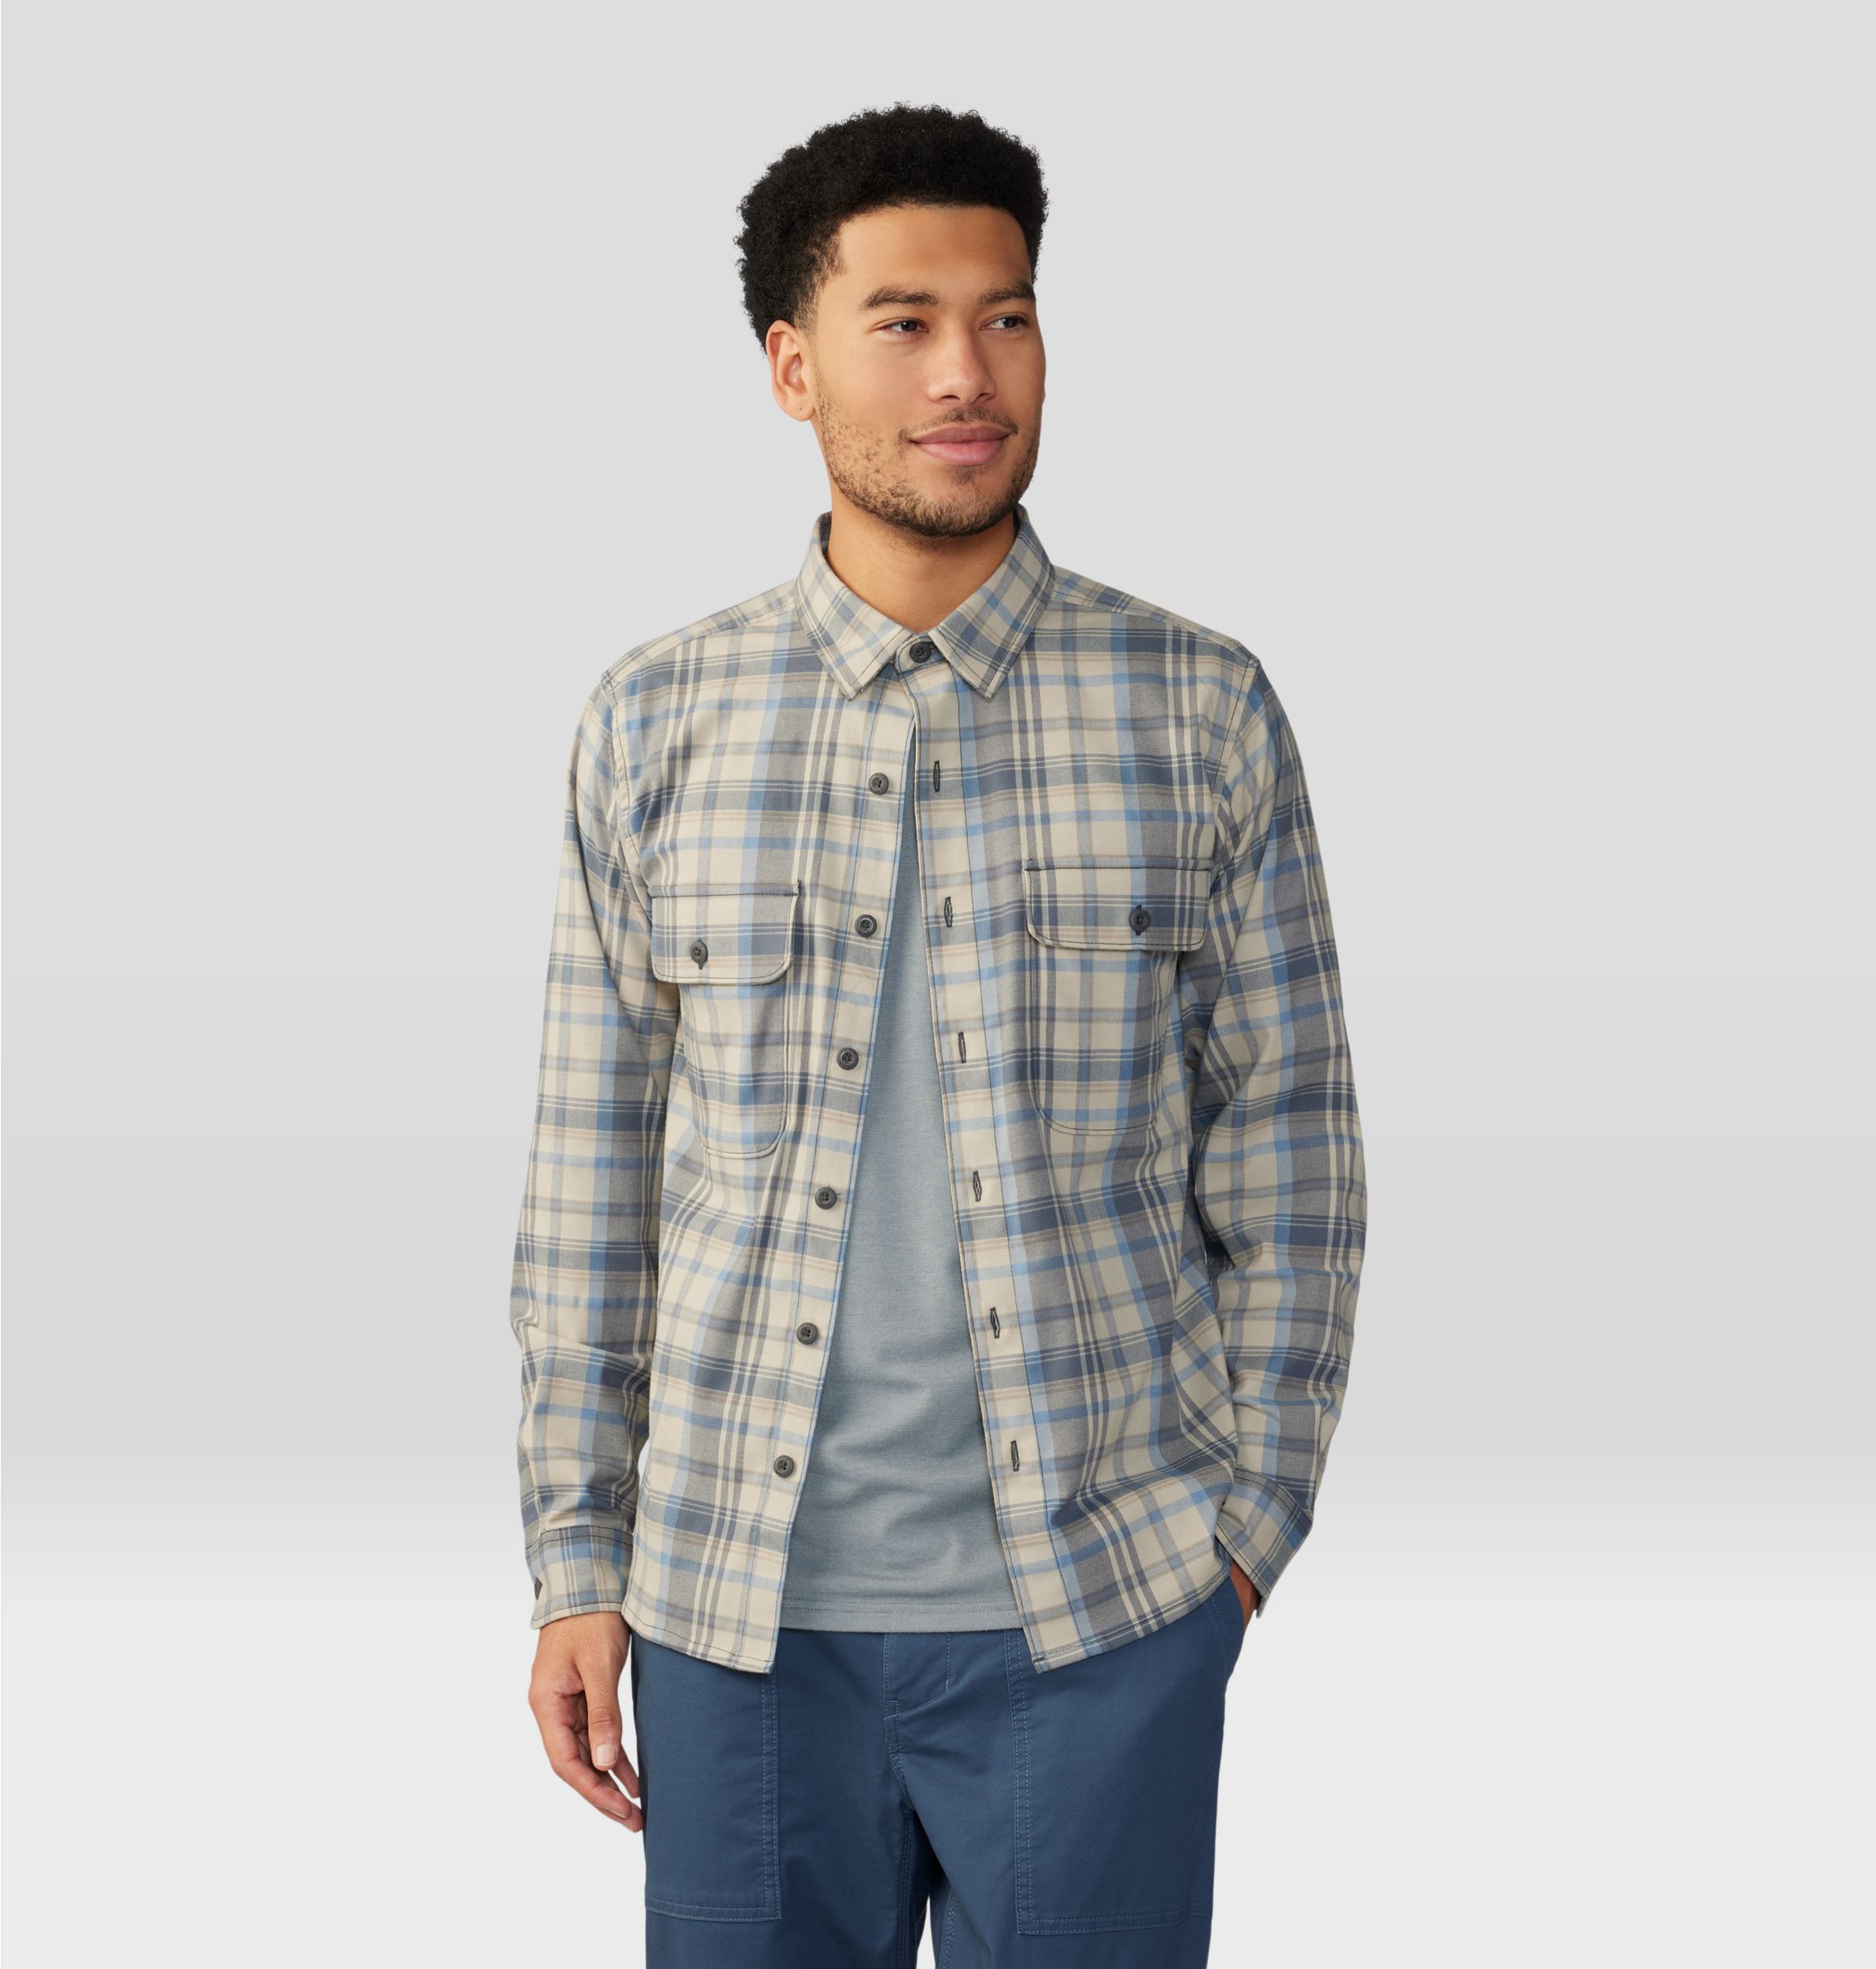 Basecamp Plaid Flannel Jacket - The Happy Clothing Company